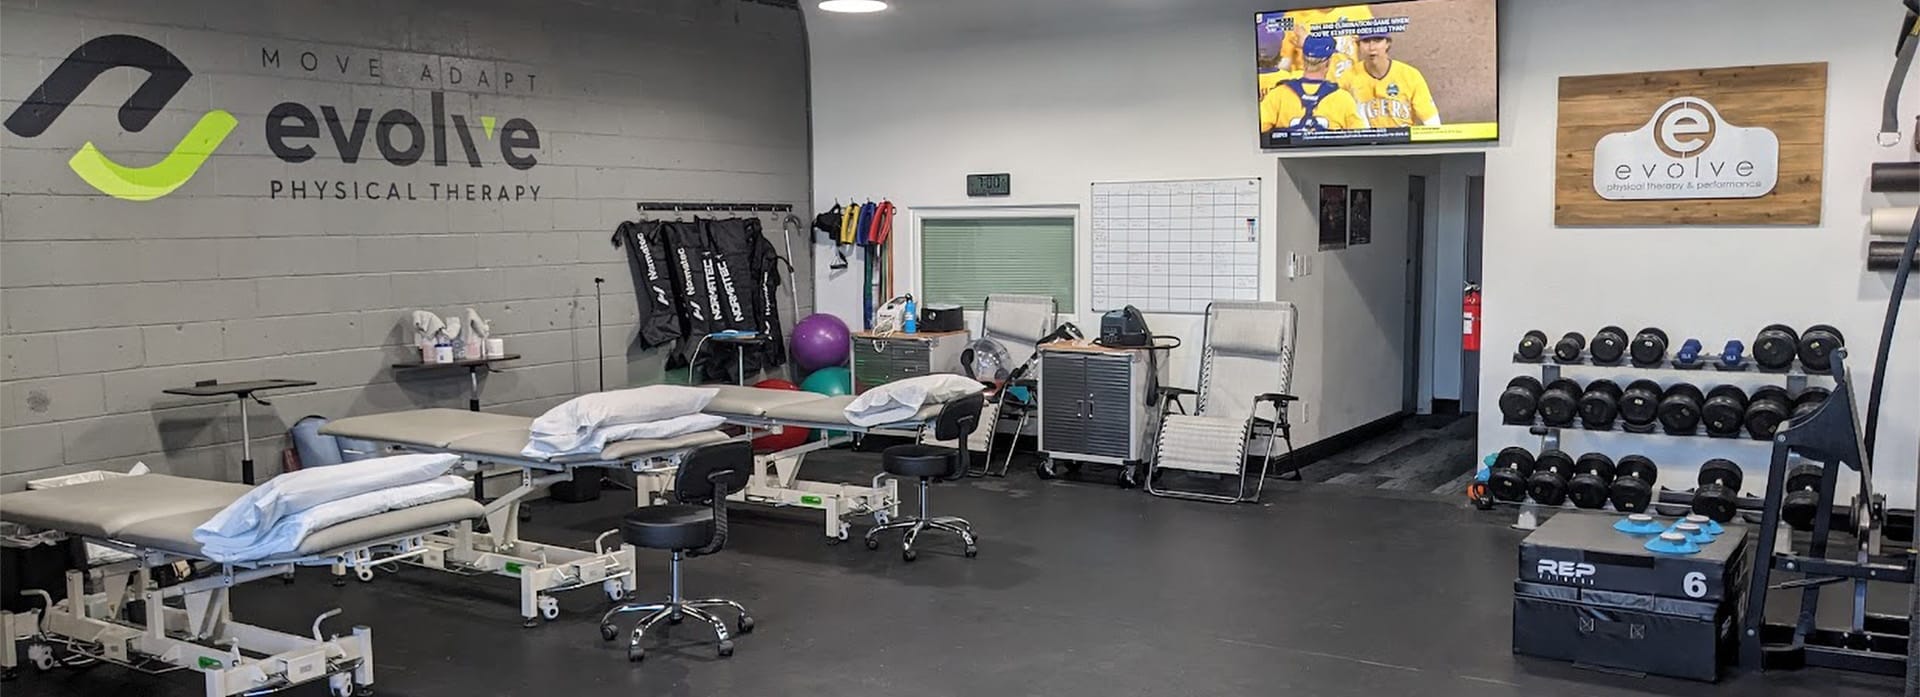 evolve physical therapy at Athletic Performance Training